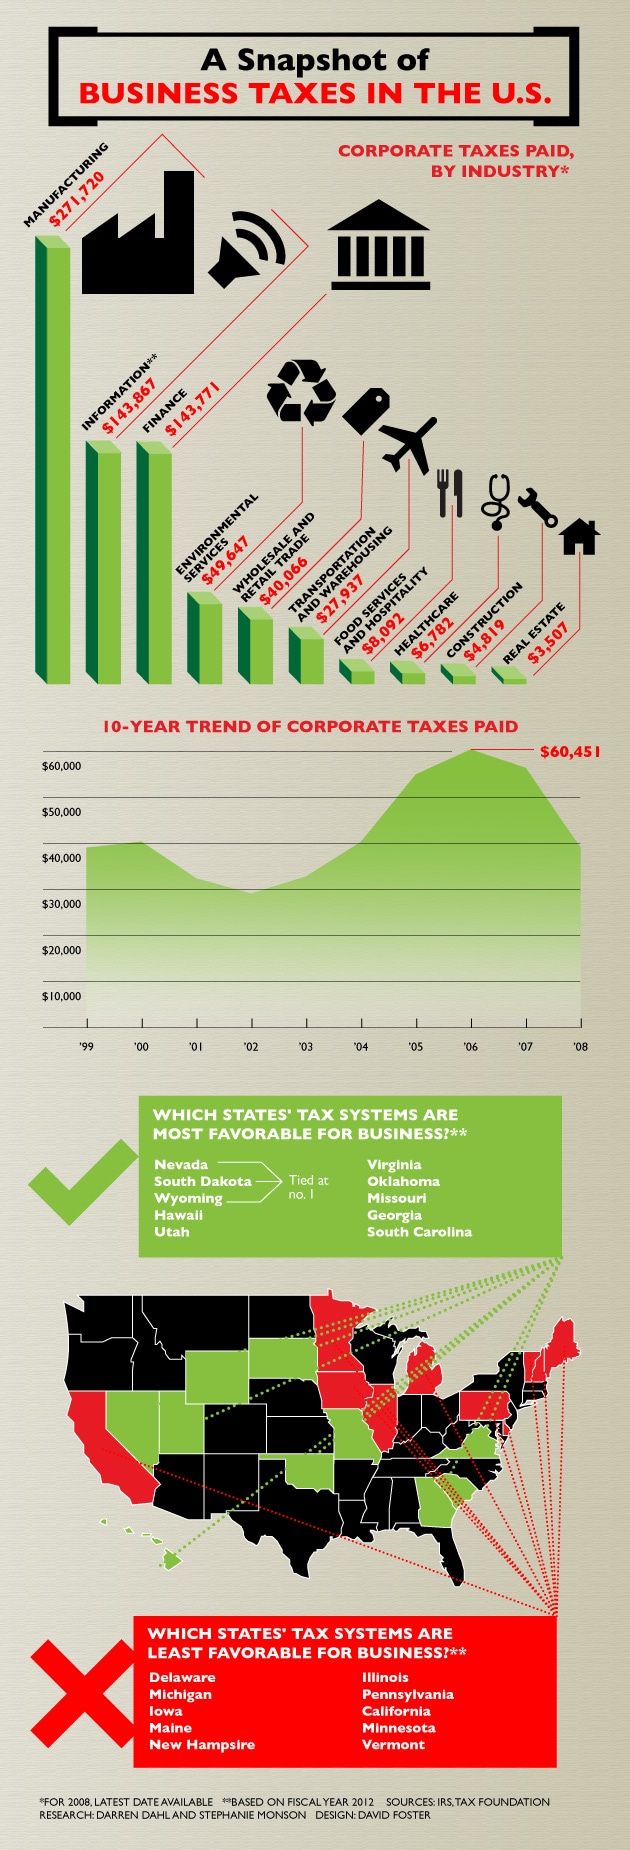 A Snapshot of Business Taxes in the U.S.